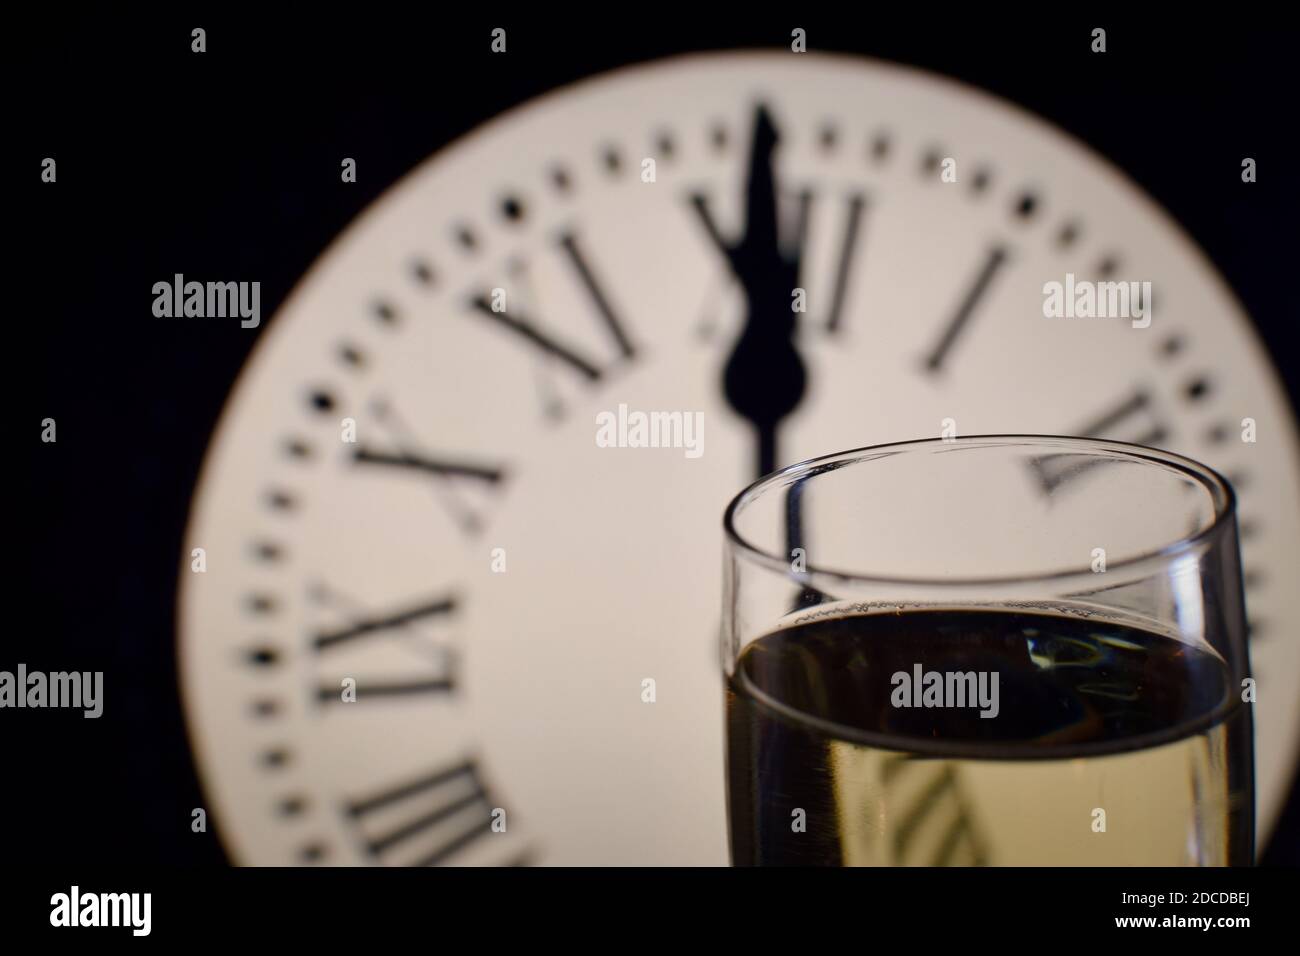 CELEBRATION OF THE NEW YEAR, glasses raising with champagne with the clock unfocussed Stock Photo